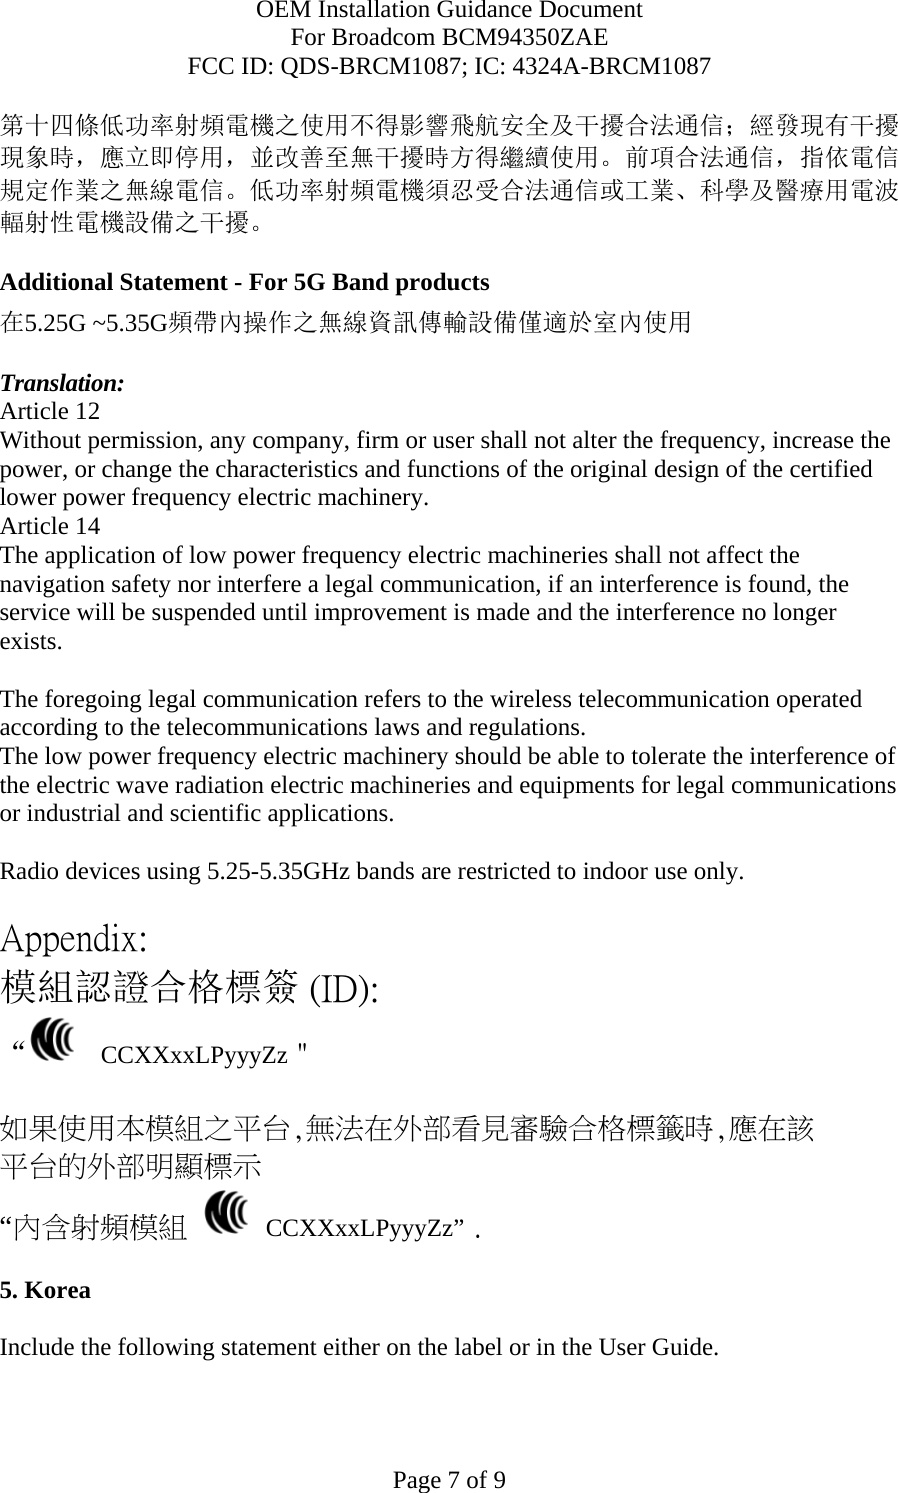 OEM Installation Guidance Document For Broadcom BCM94350ZAE FCC ID: QDS-BRCM1087; IC: 4324A-BRCM1087  Page 7 of 9 第十四條低功率射頻電機之使用不得影響飛航安全及干擾合法通信；經發現有干擾現象時，應立即停用，並改善至無干擾時方得繼續使用。前項合法通信，指依電信規定作業之無線電信。低功率射頻電機須忍受合法通信或工業、科學及醫療用電波輻射性電機設備之干擾。  Additional Statement - For 5G Band products 在5.25G ~5.35G頻帶內操作之無線資訊傳輸設備僅適於室內使用  Translation: Article 12 Without permission, any company, firm or user shall not alter the frequency, increase the power, or change the characteristics and functions of the original design of the certified lower power frequency electric machinery. Article 14 The application of low power frequency electric machineries shall not affect the navigation safety nor interfere a legal communication, if an interference is found, the service will be suspended until improvement is made and the interference no longer exists.  The foregoing legal communication refers to the wireless telecommunication operated according to the telecommunications laws and regulations. The low power frequency electric machinery should be able to tolerate the interference of the electric wave radiation electric machineries and equipments for legal communications or industrial and scientific applications.  Radio devices using 5.25-5.35GHz bands are restricted to indoor use only.  Appendix: 模組認證合格標簽 (ID): “   CCXXxxLPyyyZz＂  如果使用本模組之平台,無法在外部看見審驗合格標籤時,應在該 平台的外部明顯標示 “內含射頻模組   CCXXxxLPyyyZz” .  5. Korea  Include the following statement either on the label or in the User Guide.   